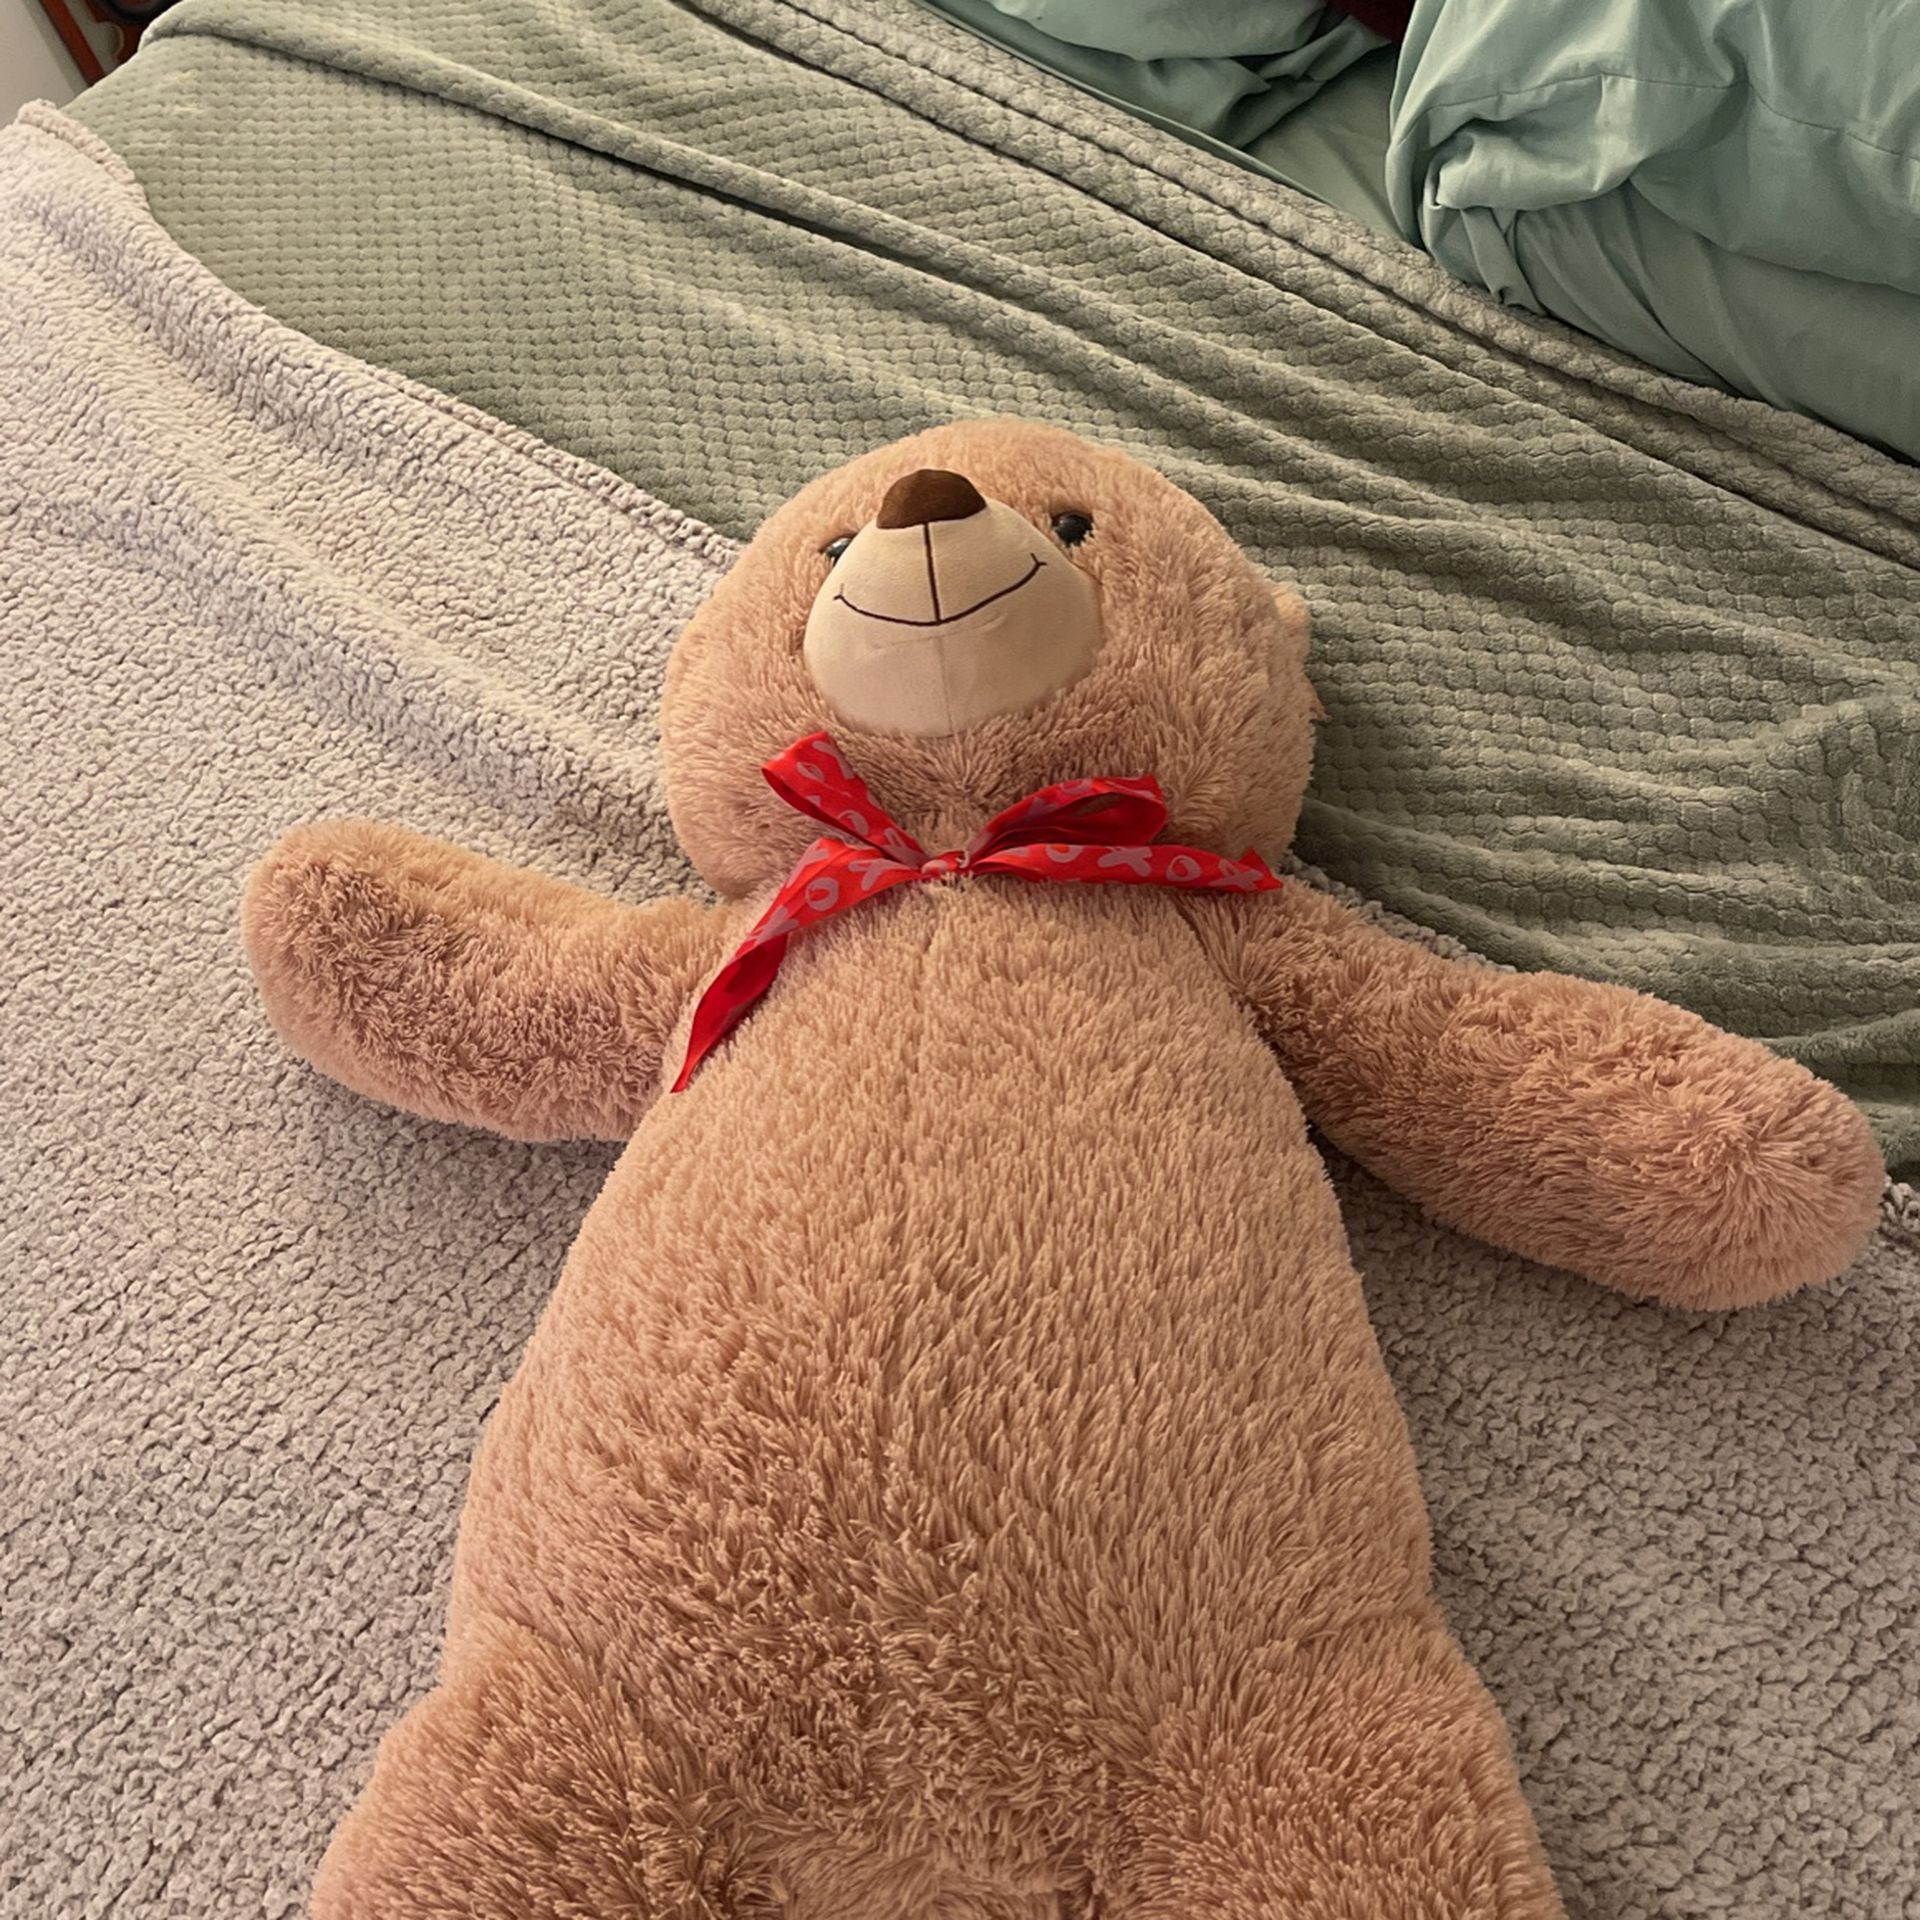 Giant 3.5 Foot Teddy Bear Valentine’s Day Gift